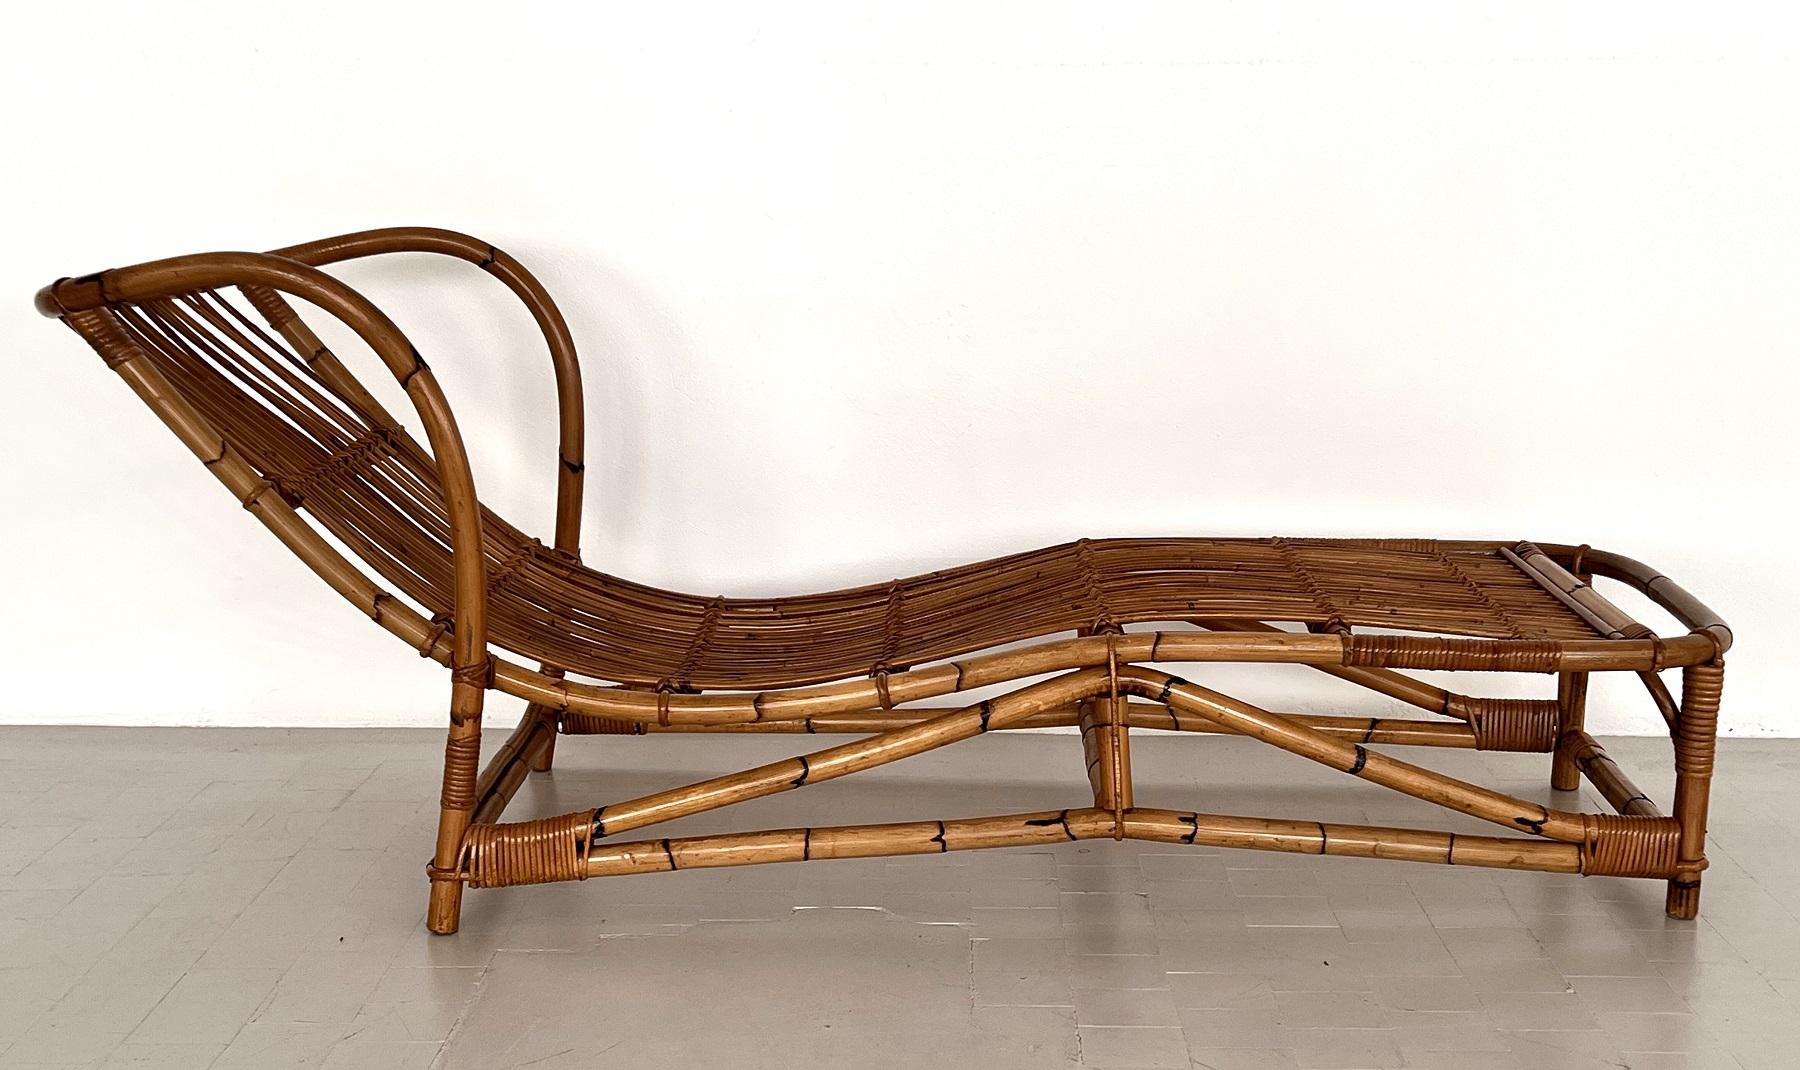 Hand-Crafted Italian Midcentury Organic Bamboo Daybed or Sunbed For Sale